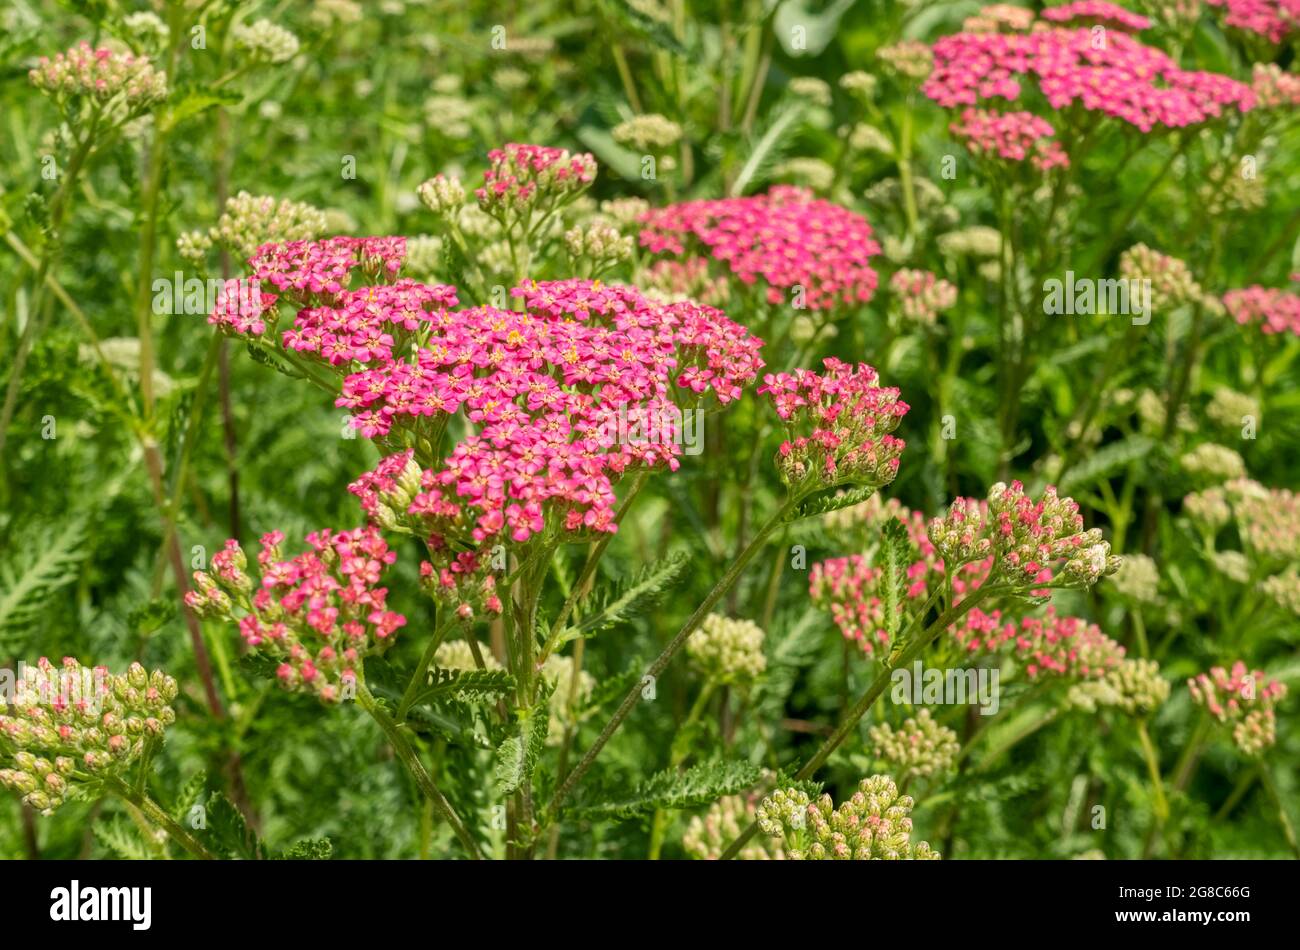 Close up of pink achillea flowers flower flowering growing in a flowerbed garden in summer England UK United Kingdom GB Great Britain Stock Photo